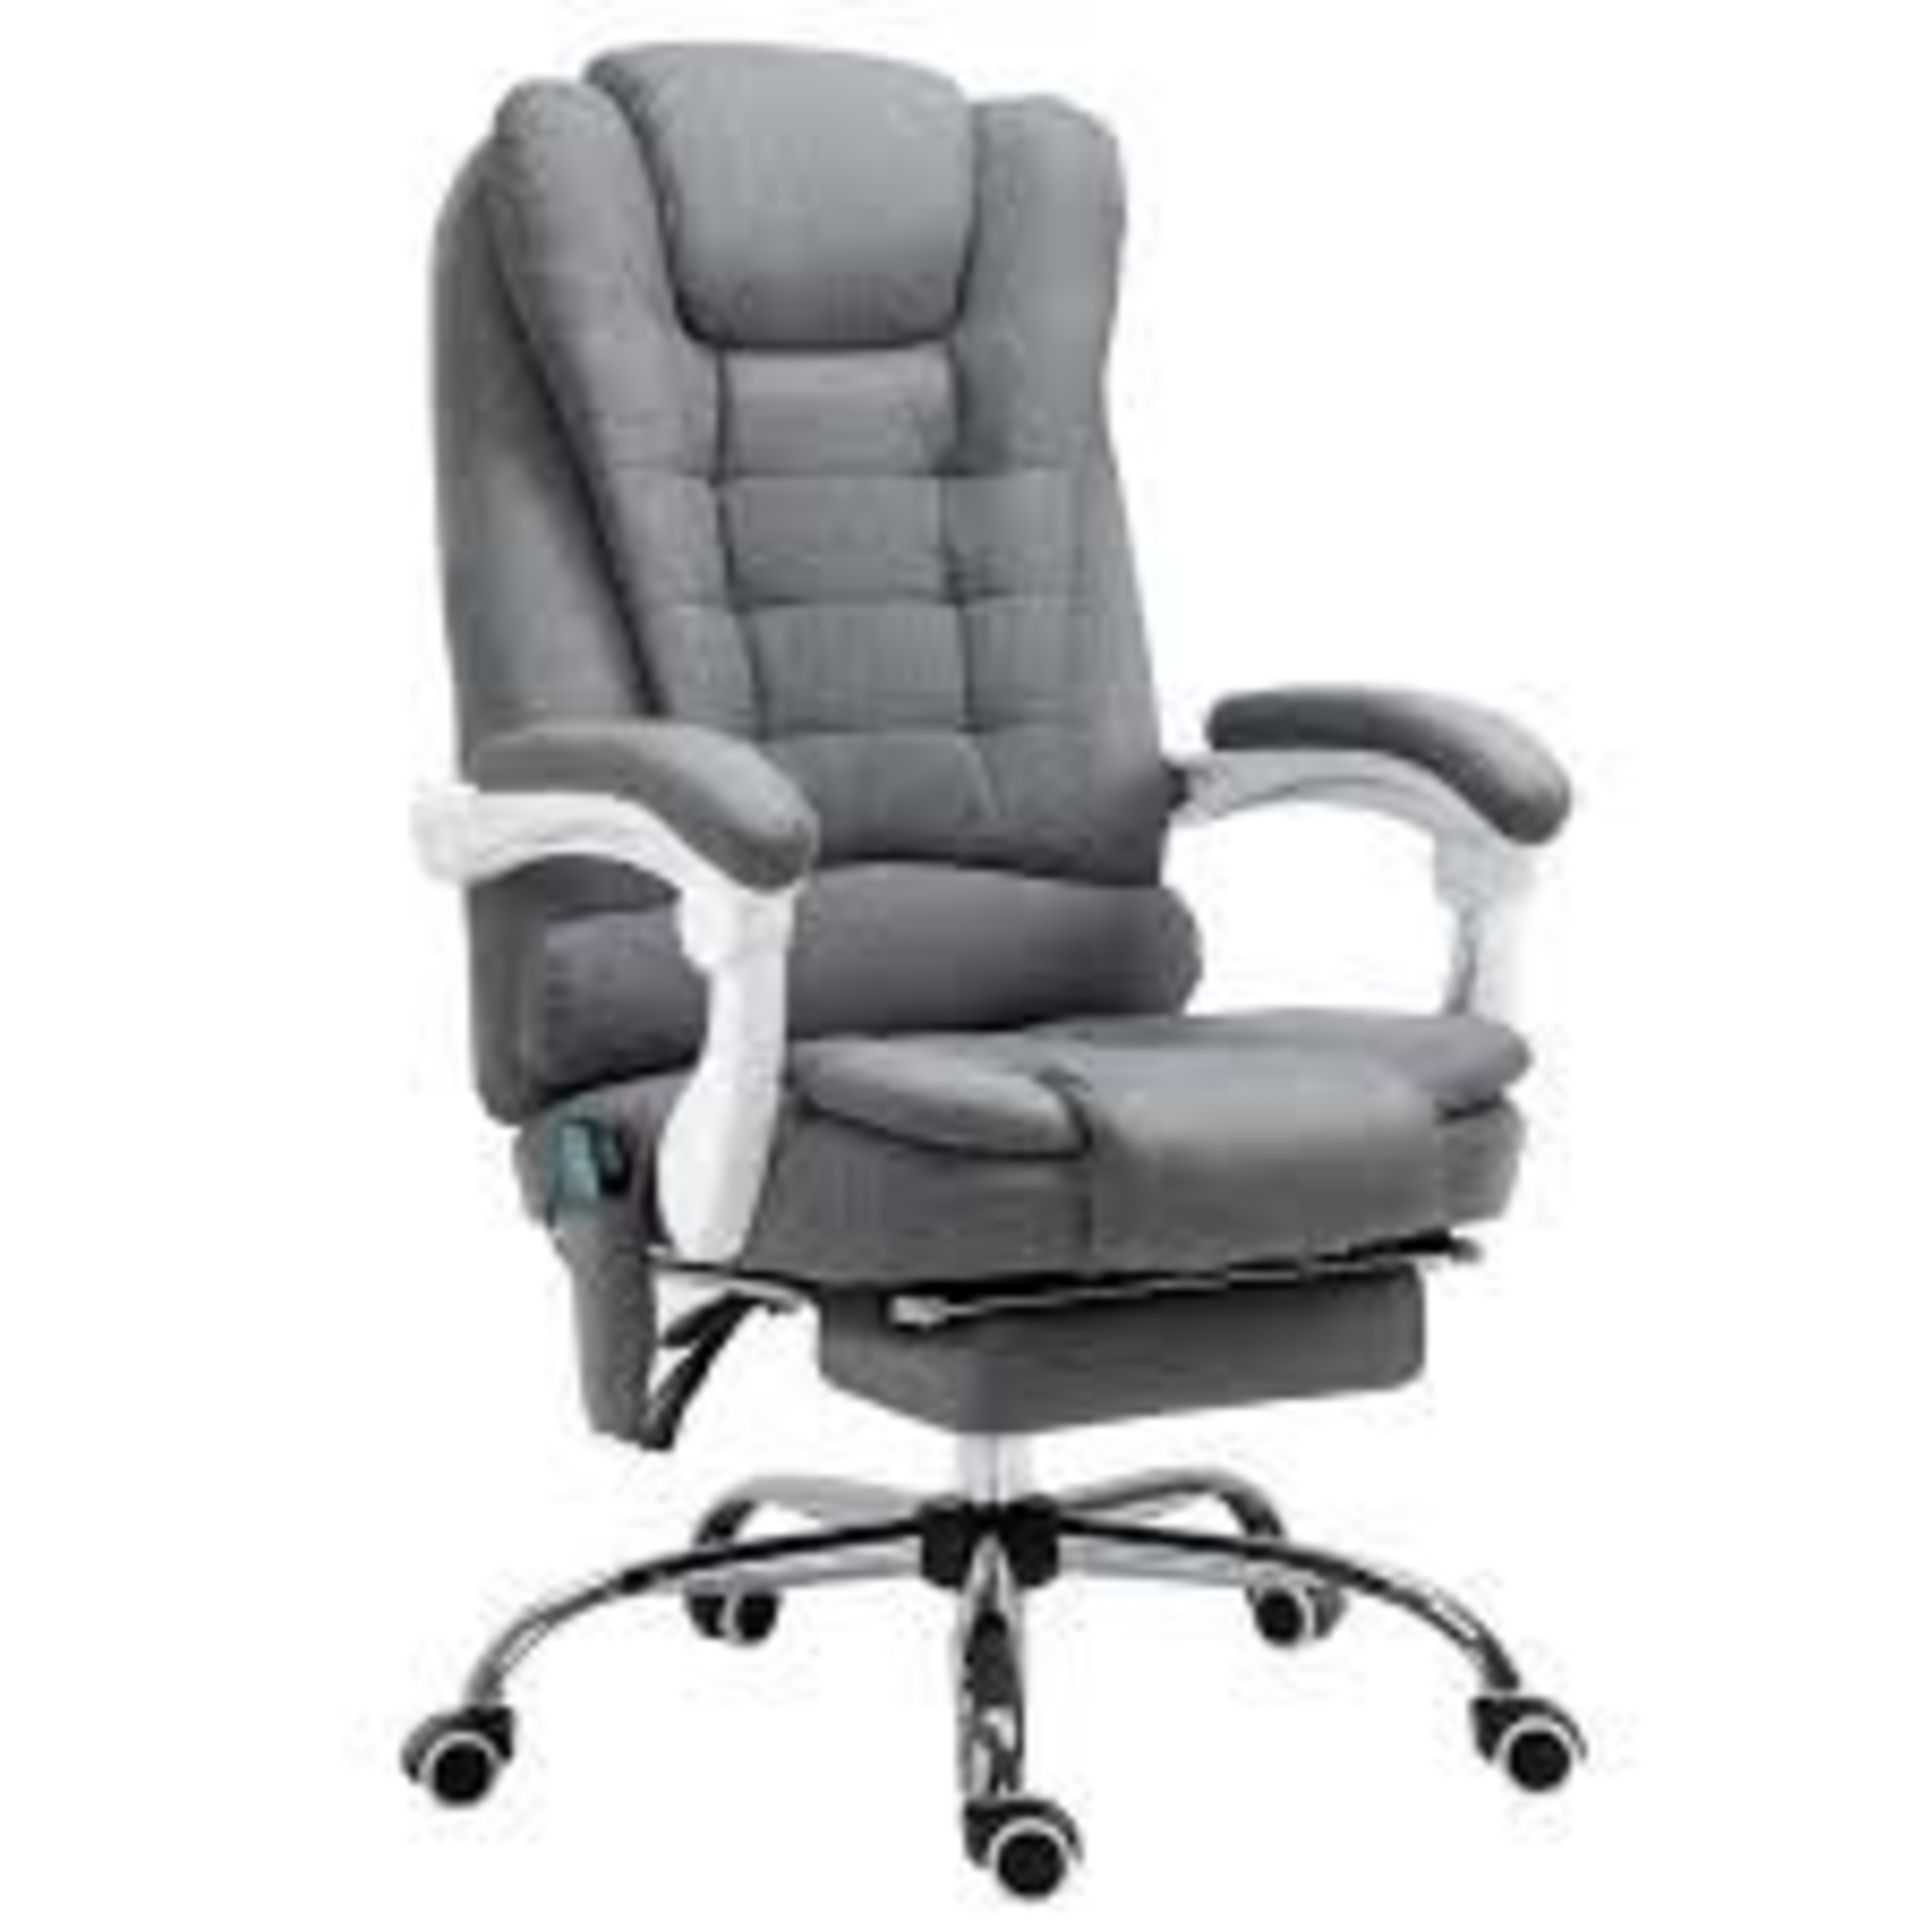 Vinsetto Heated 6 Points Vibration Massage Executive Office Chair - PW.